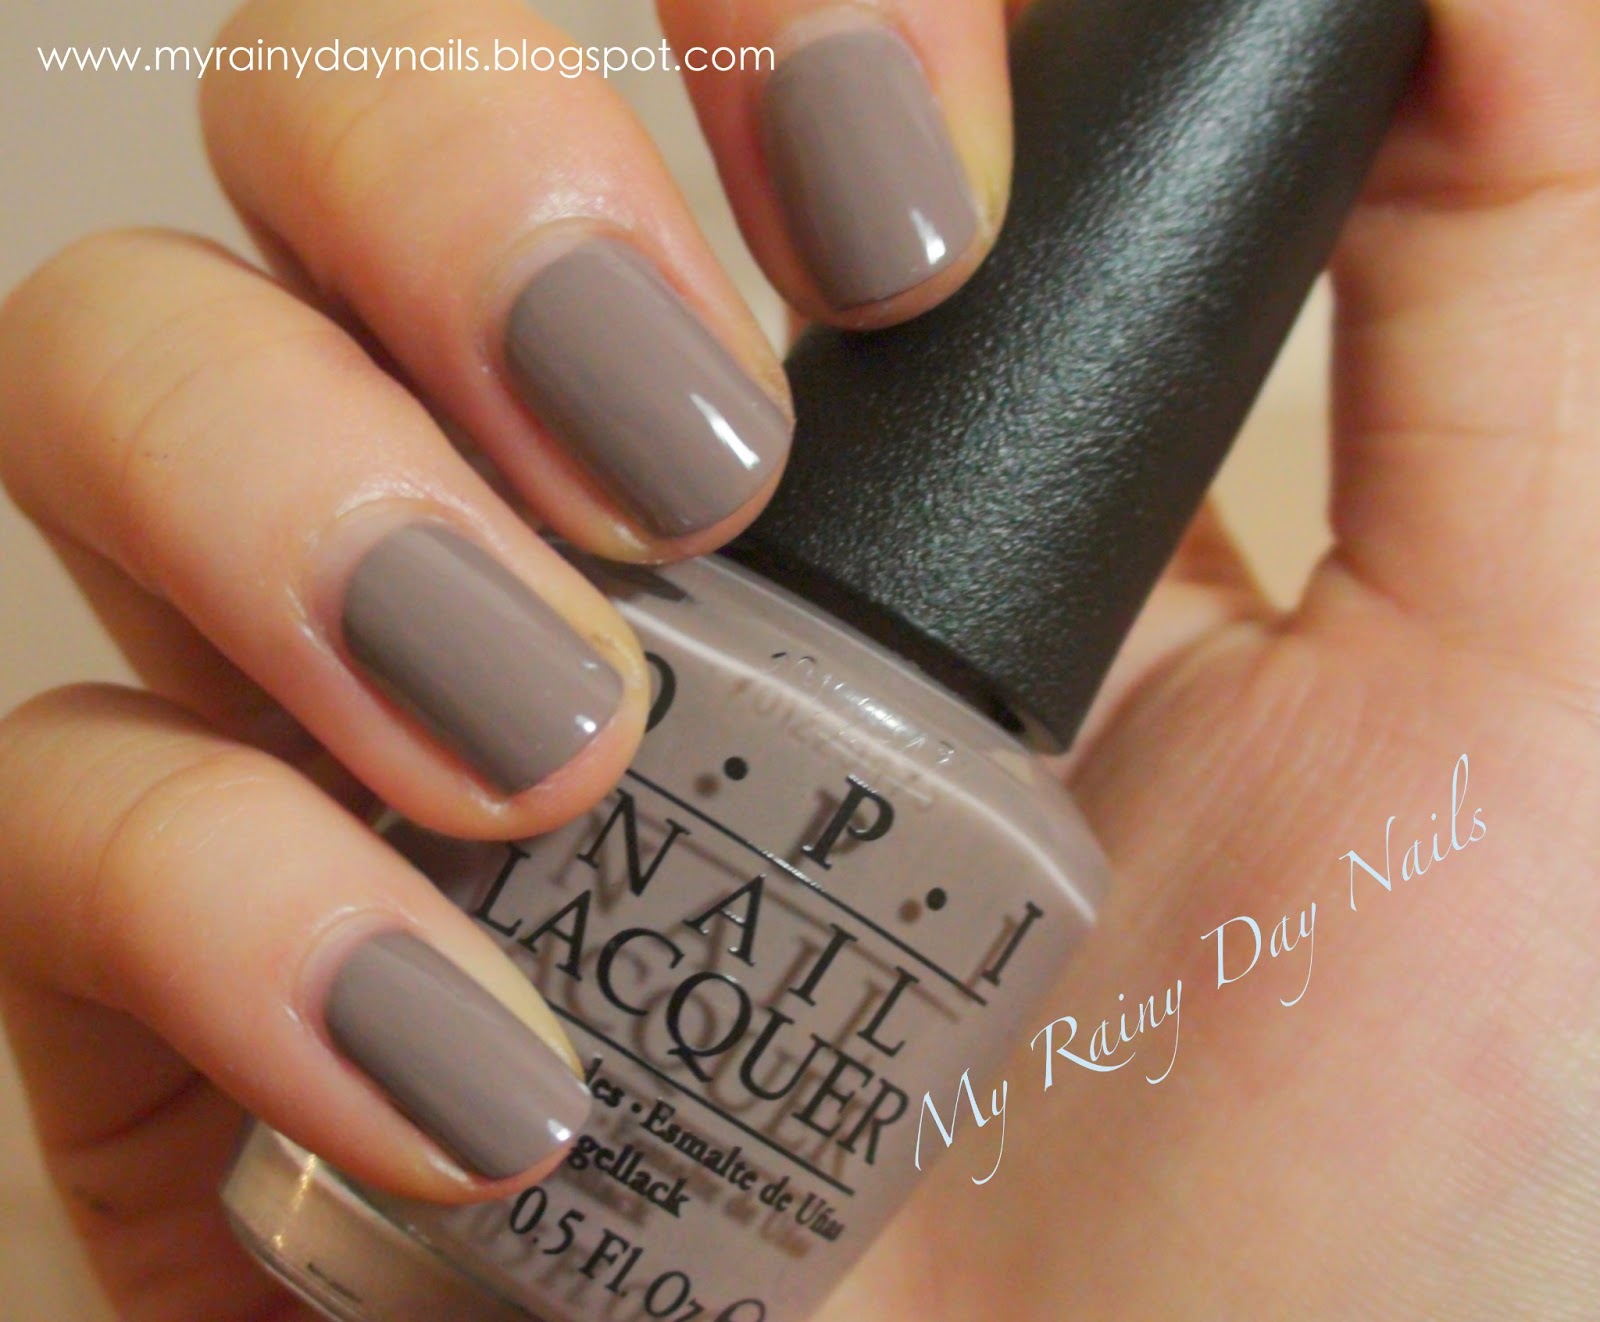 9. OPI "Berlin There Done That" - wide 7